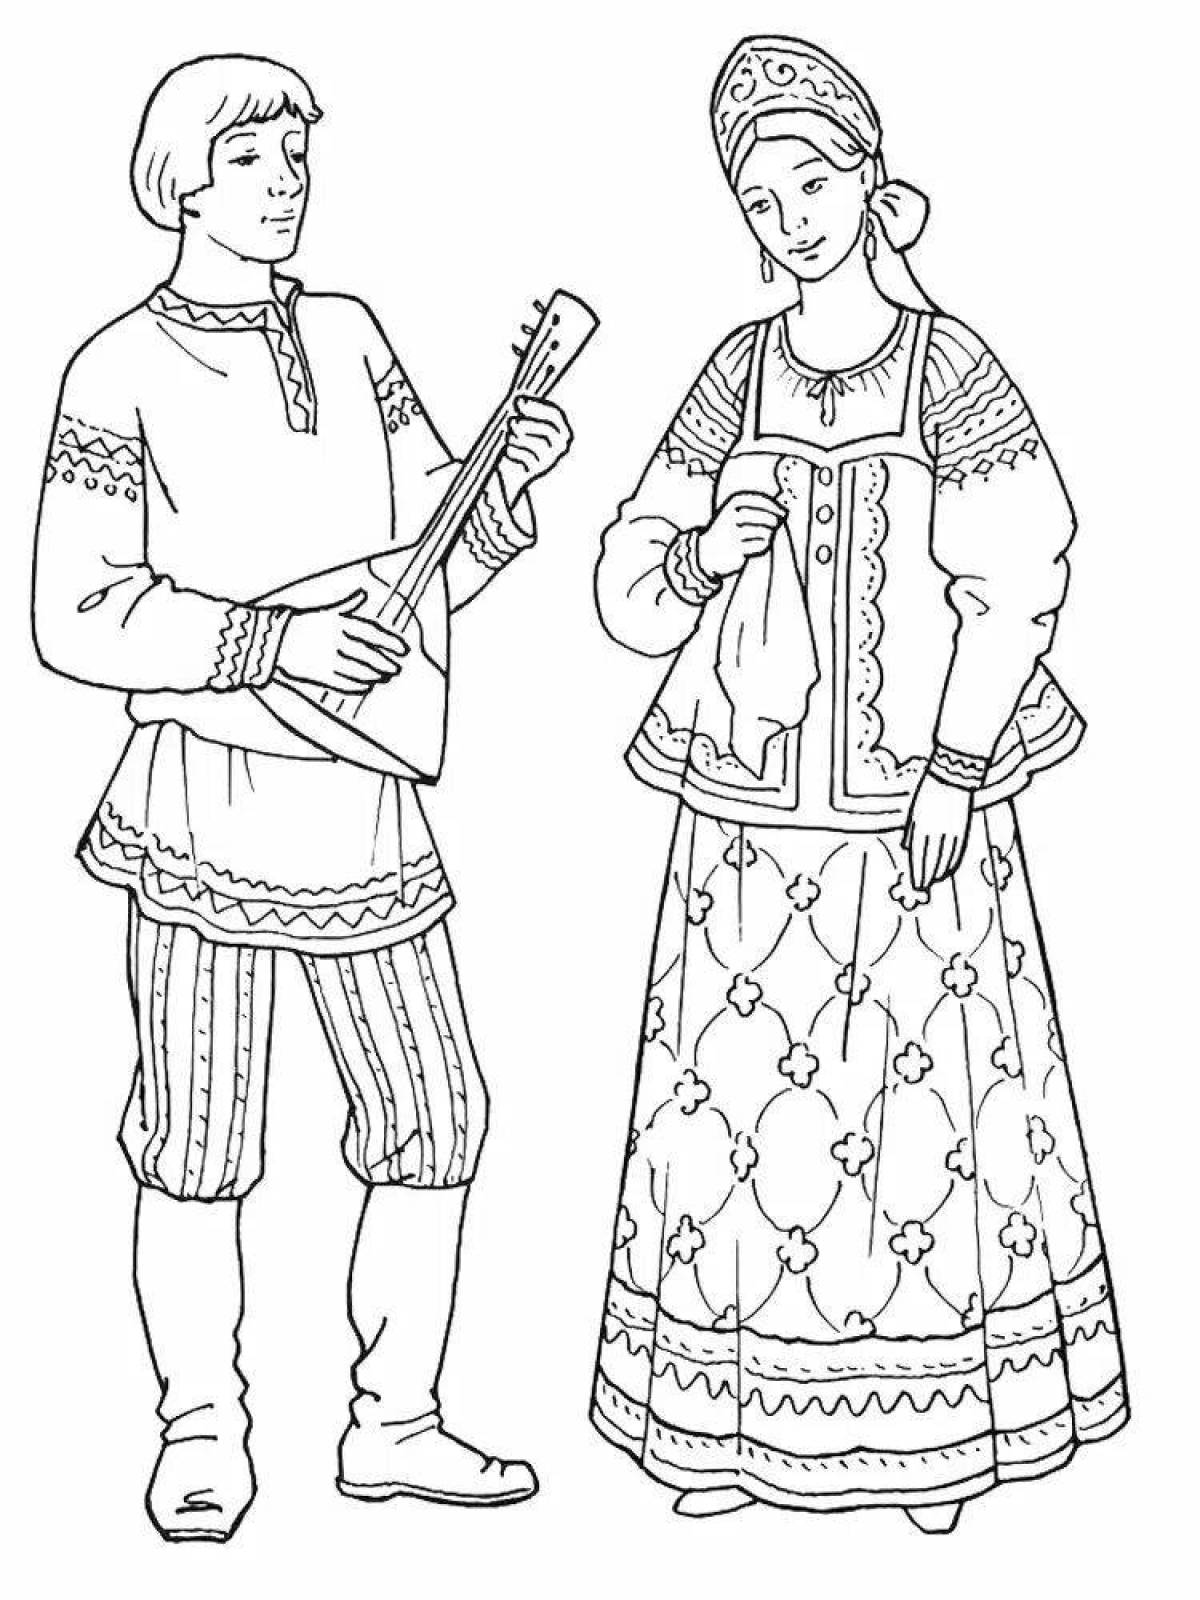 Charming national costume russia coloring book